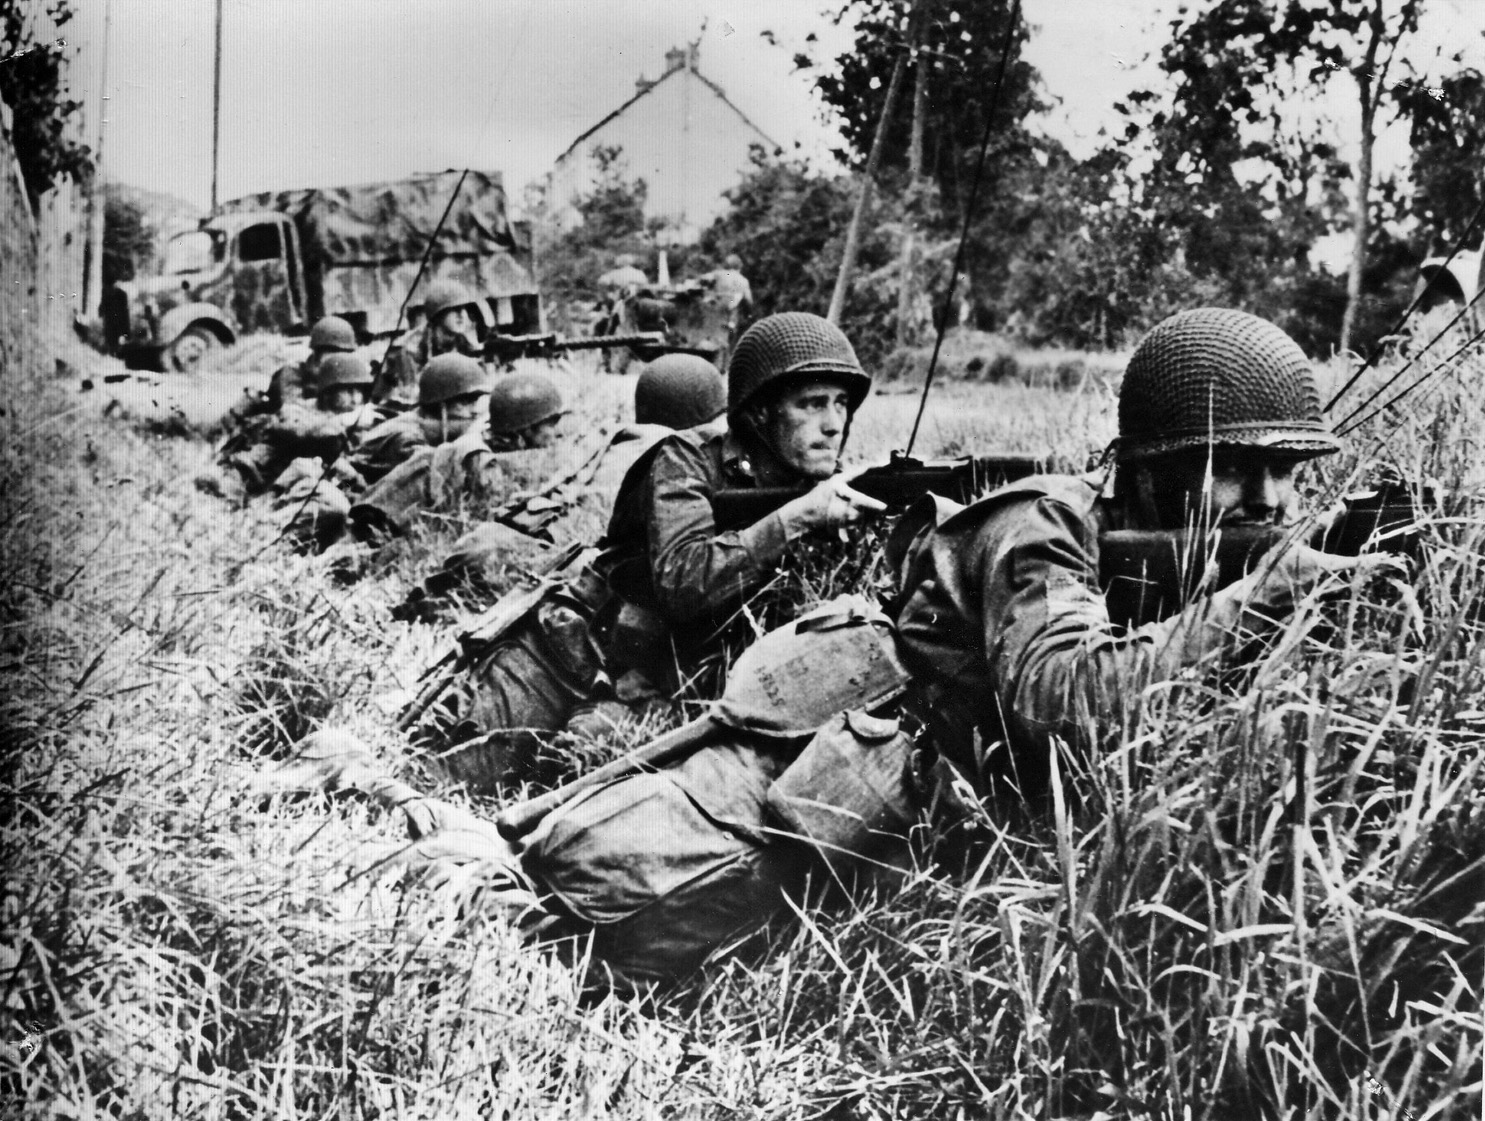 American soldiers return fire against German troops near the town of St. Sauveur, France. The Germans put up a fierce rearguard defense against the advancing Americans, but the town fell on June 16.